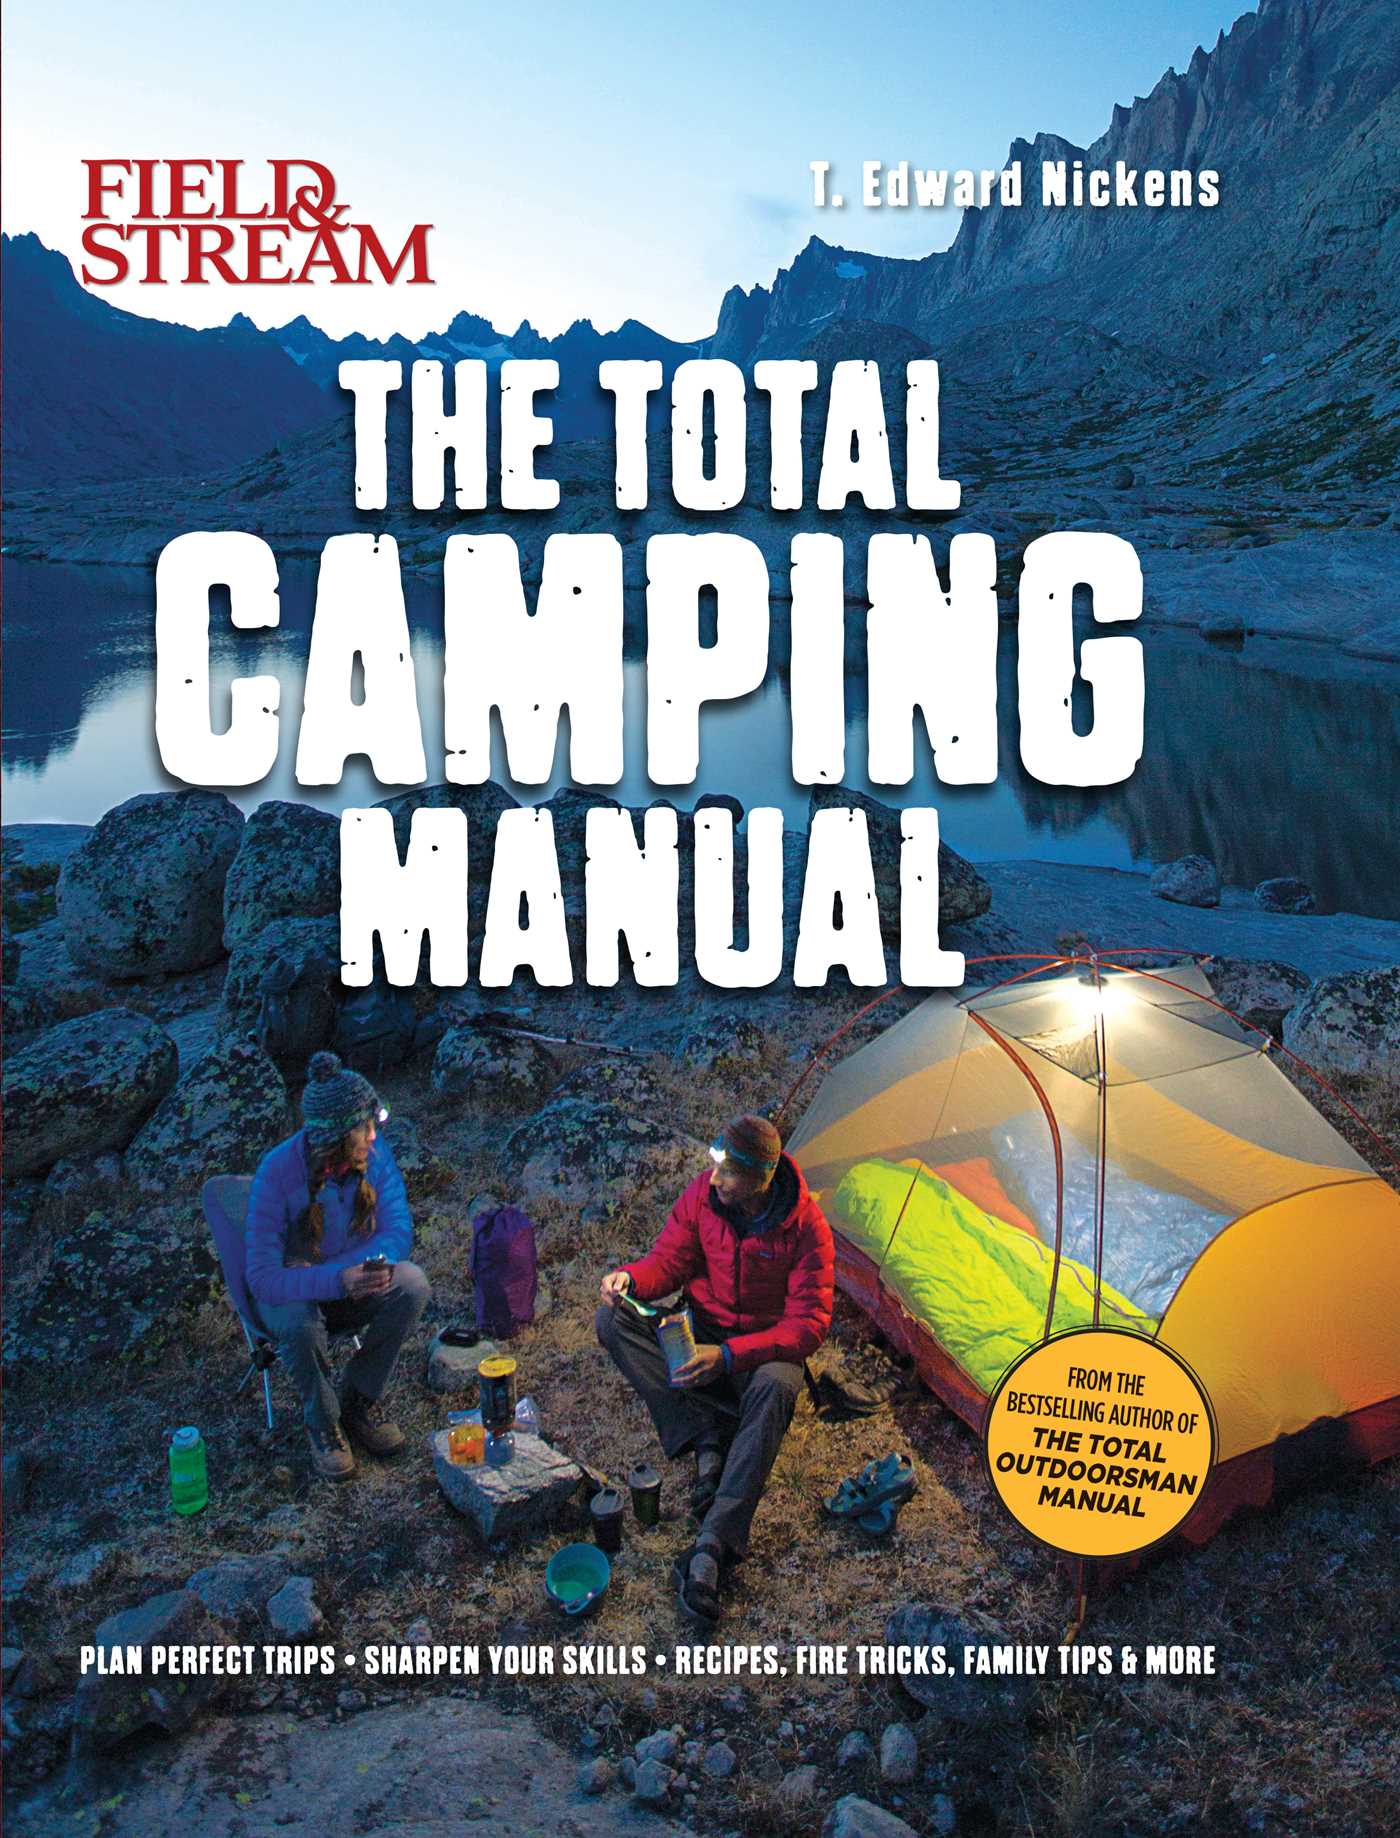 Field &amp; Stream: Total Camping Manual (Outdoor Skills, Family Camping)